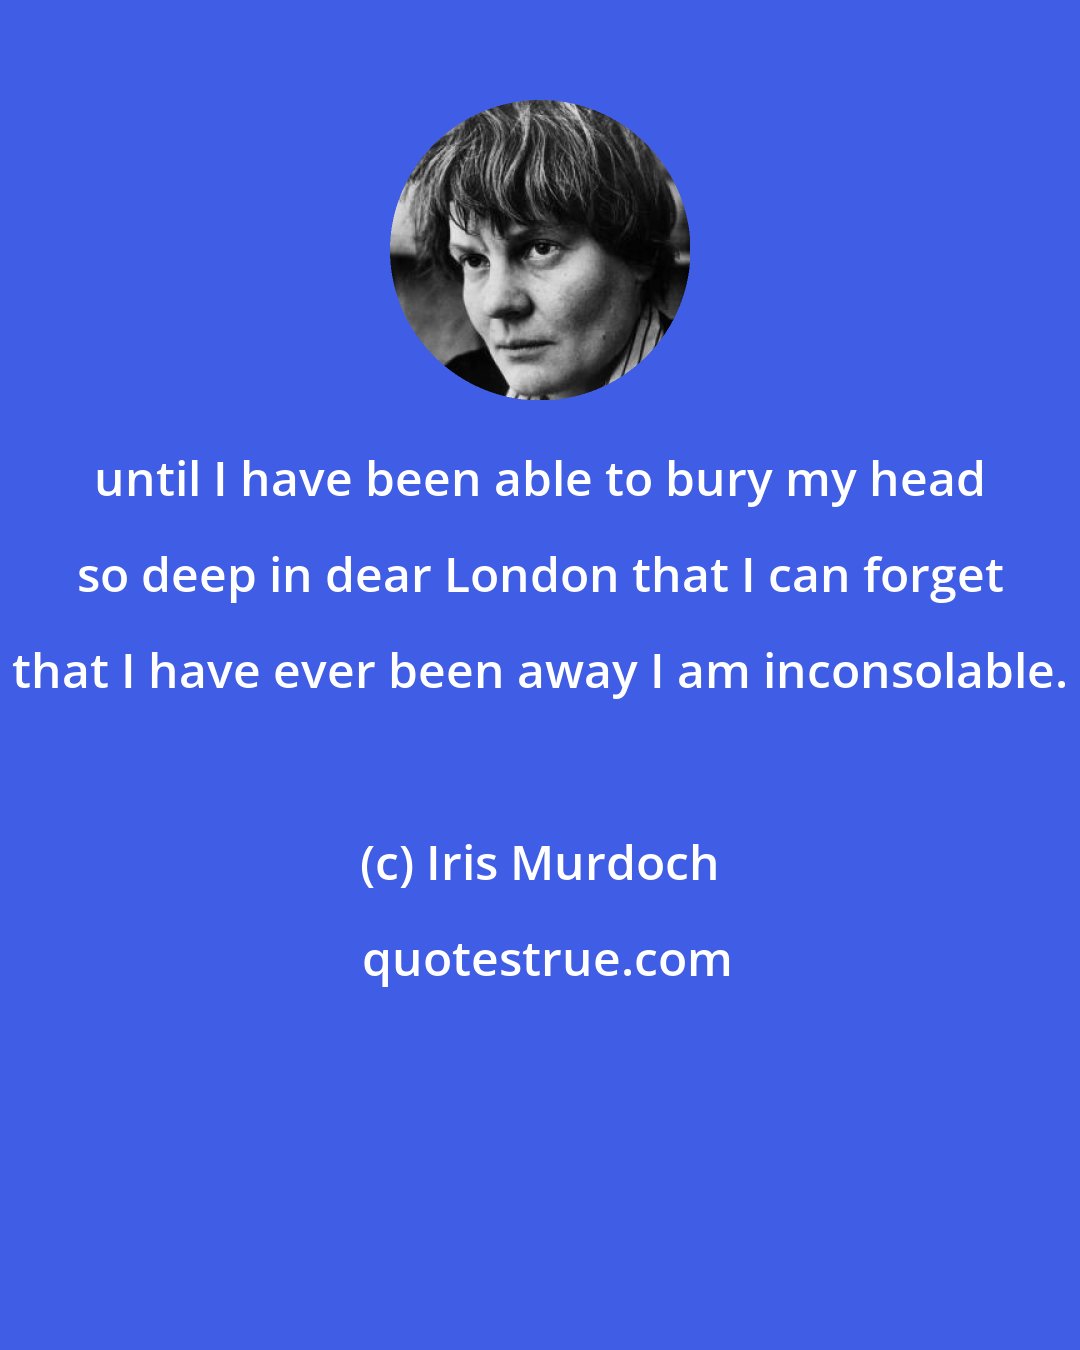 Iris Murdoch: until I have been able to bury my head so deep in dear London that I can forget that I have ever been away I am inconsolable.